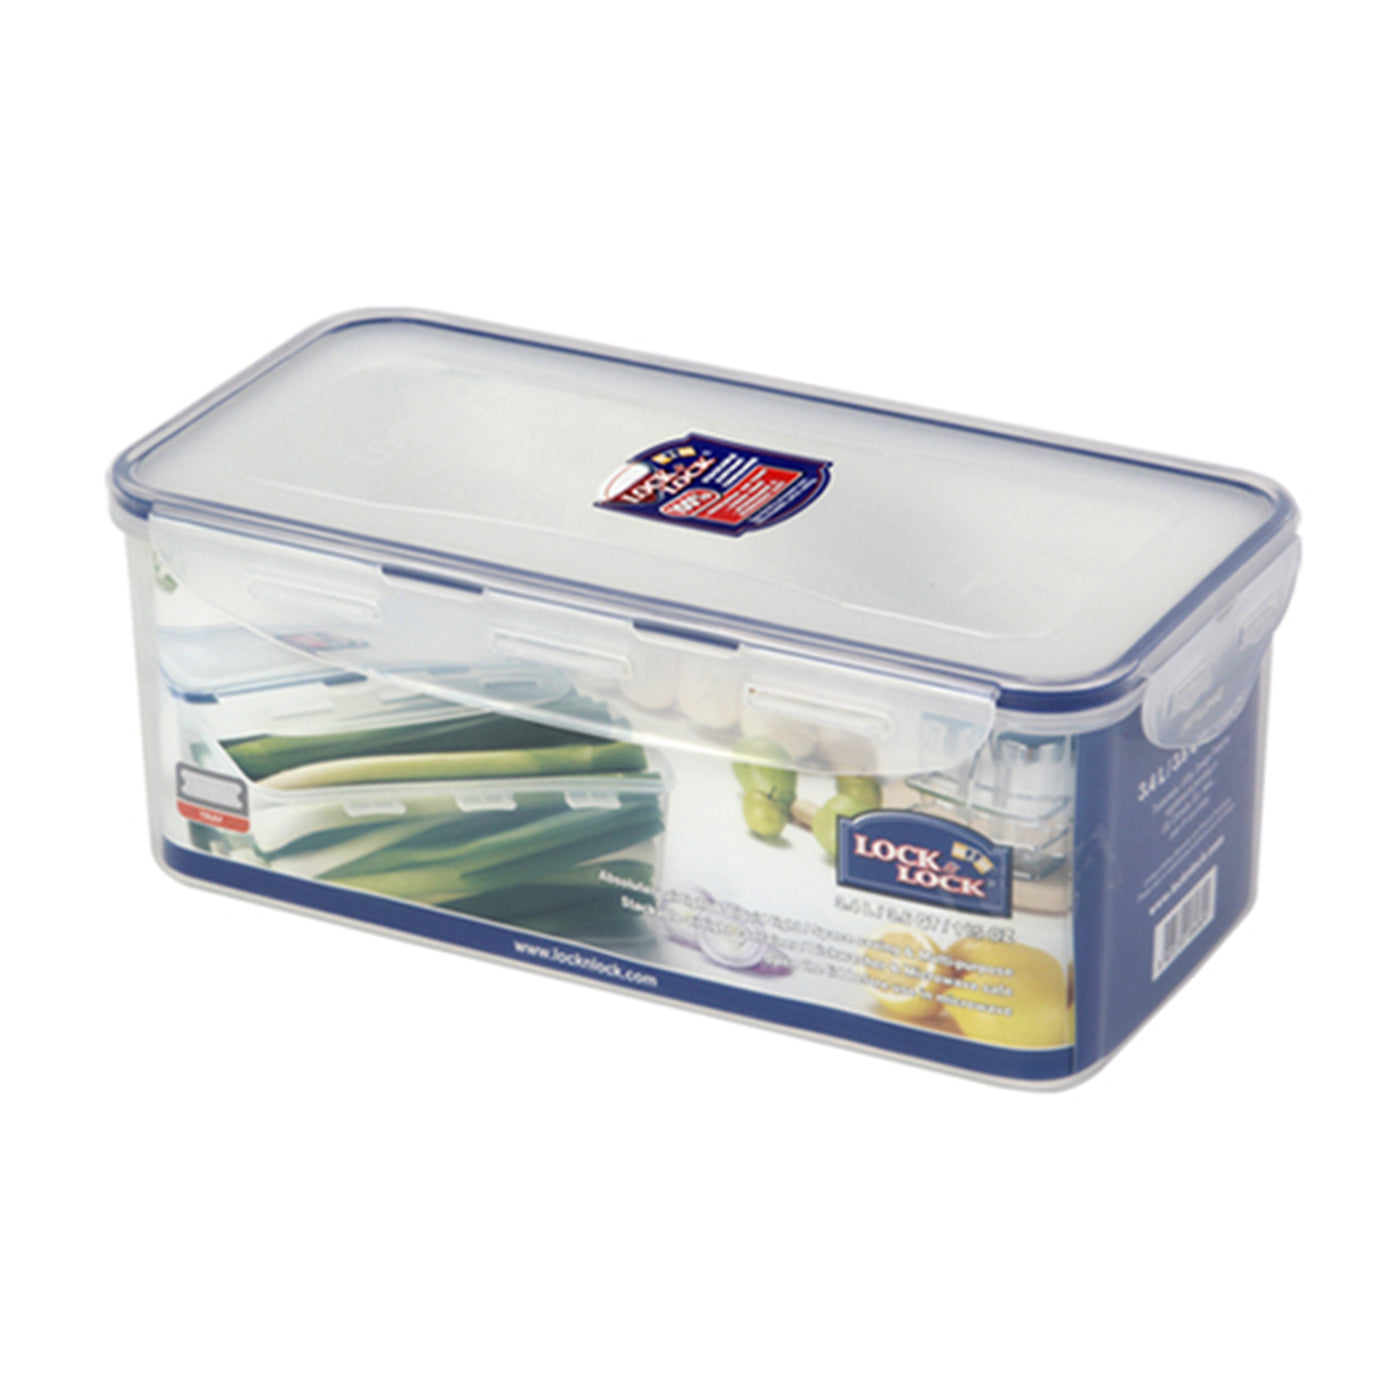 LocknLock Classics Large Flat Oblong Food Container with Tray, Transparent